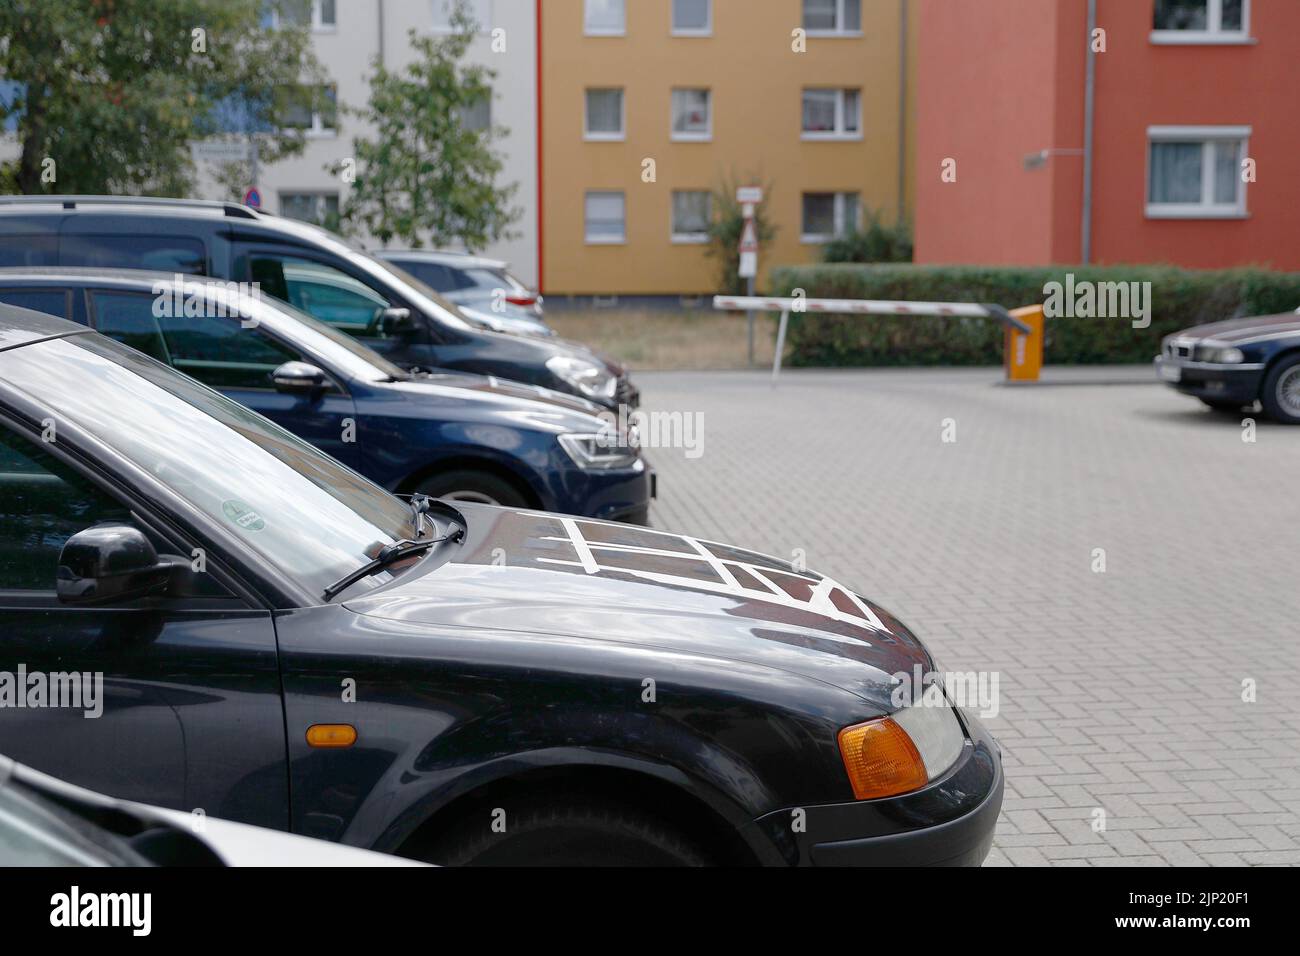 Berlin, Germany. 15th Aug, 2022. The hoods of several cars have been taped over after swastikas were scratched into the hoods of the cars. (to dpa "More swastikas discovered on car hoods in Berlin") Credit: Carsten Koall/dpa/Alamy Live News Stock Photo